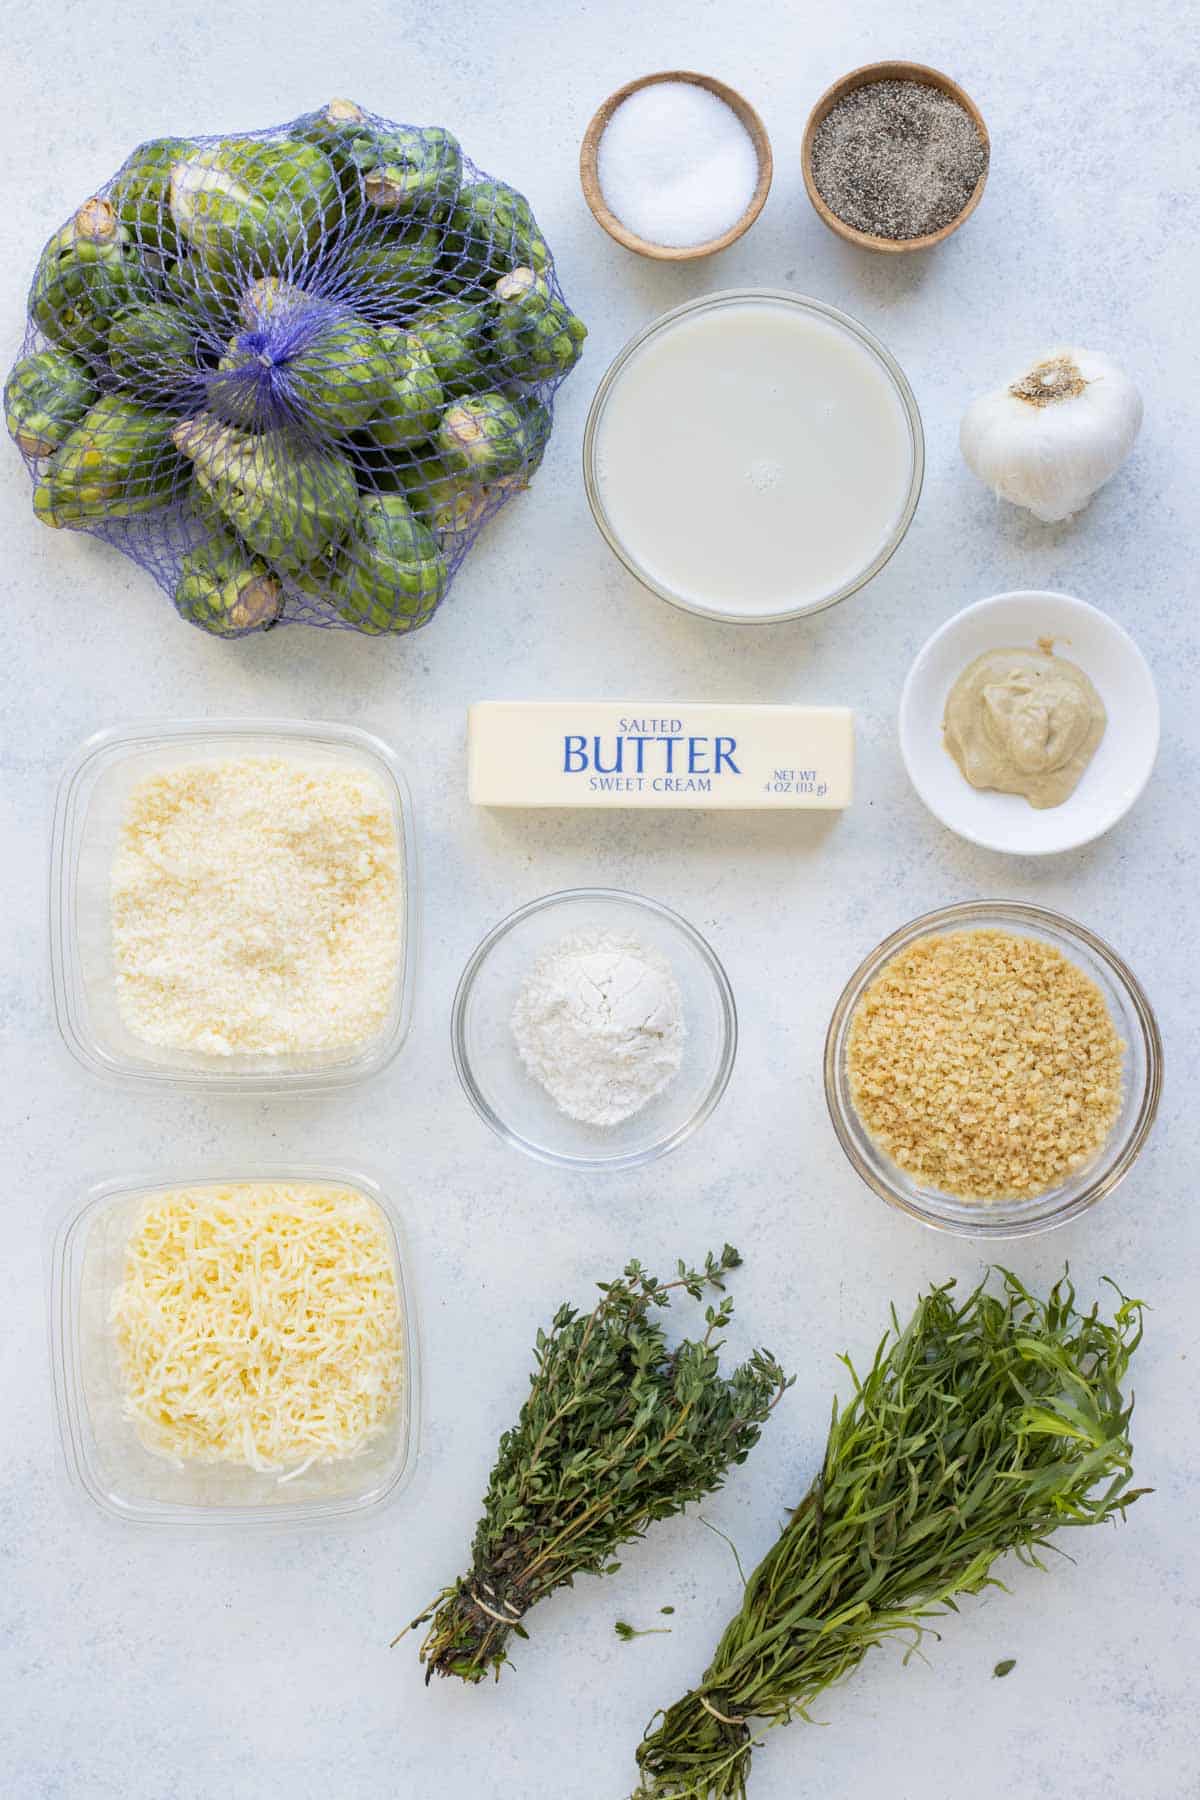 Brussels sprouts, butter, milk, cheese, garlic, breadcrumbs, and herbs are the ingredients for Brussels Sprouts au Gratin.